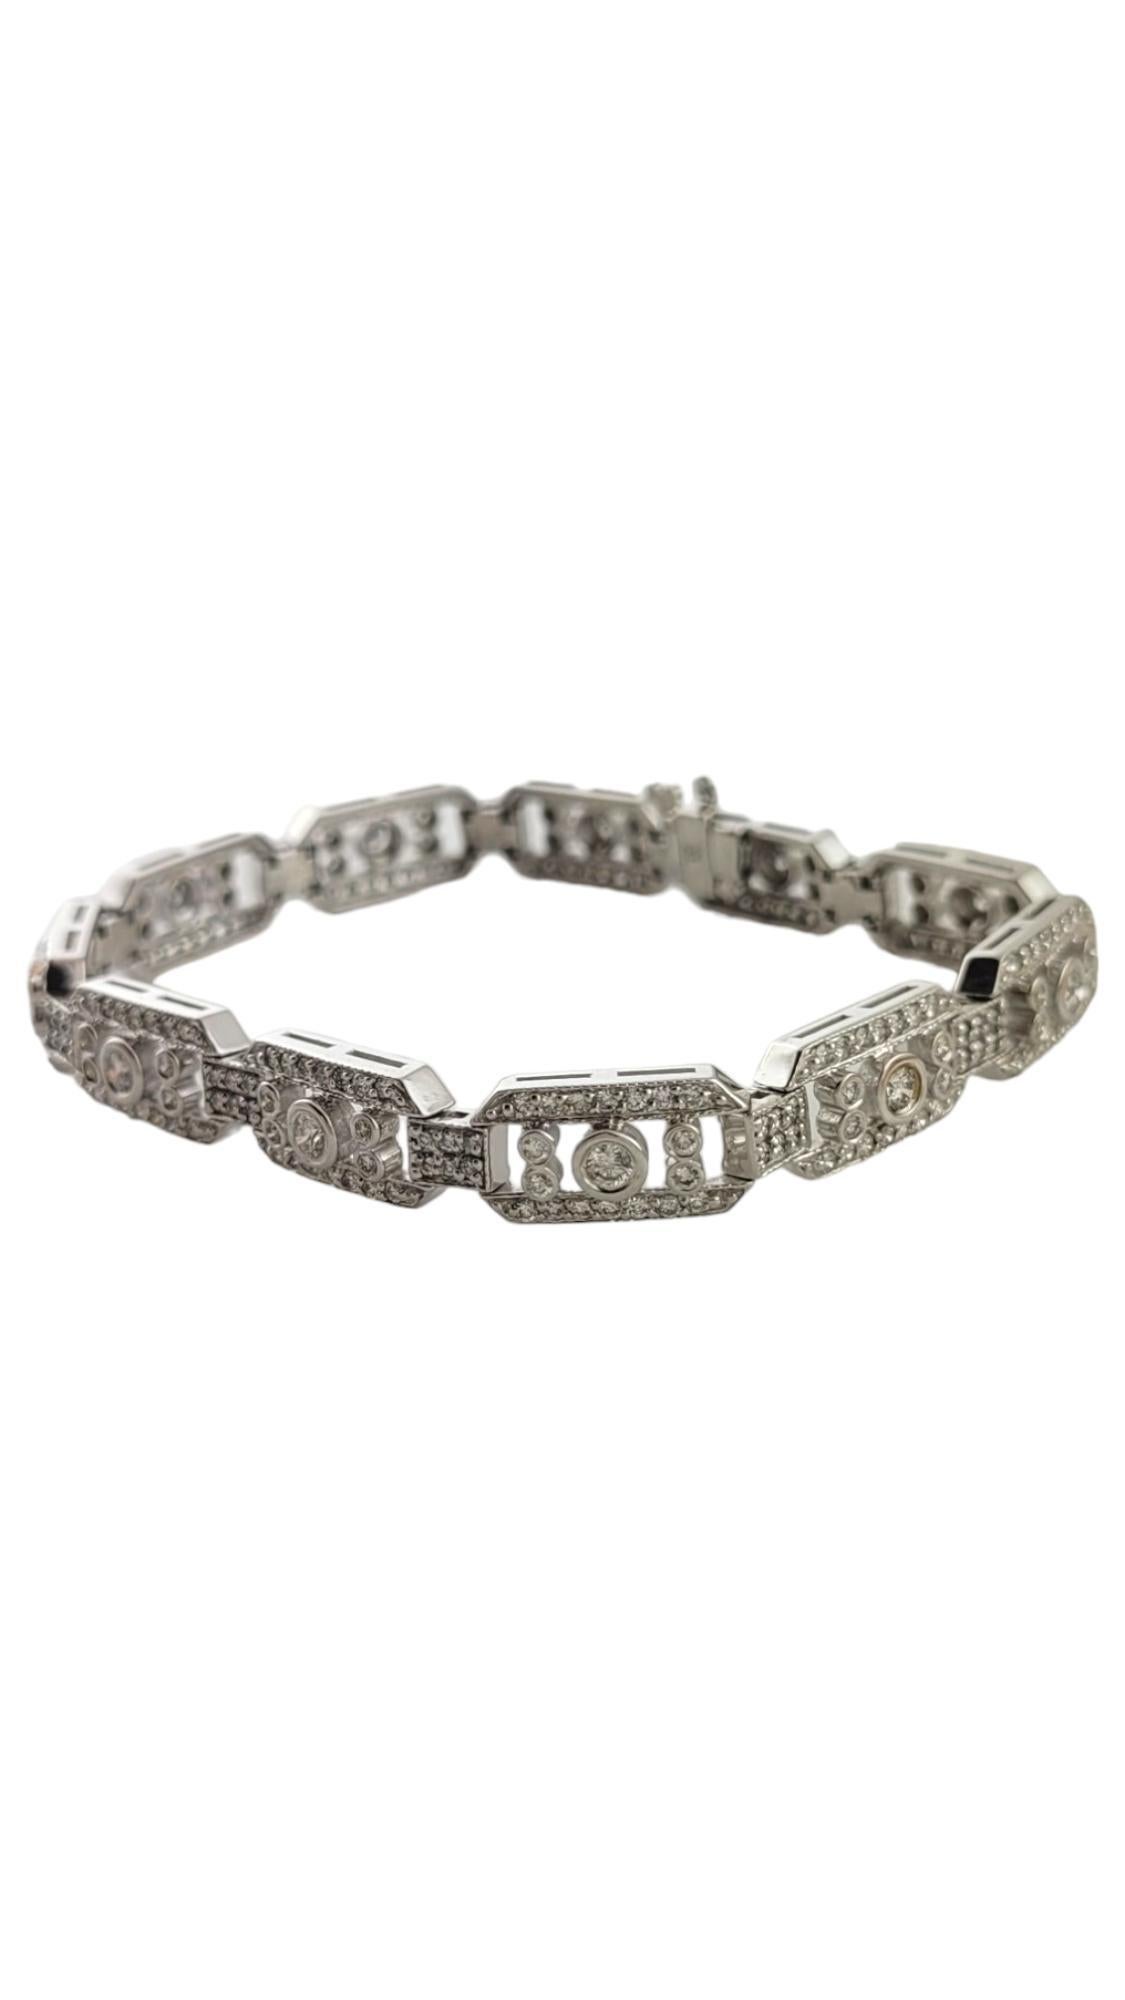 This sparkling bracelet features 275 round brilliant cut diamonds set in beautifully detailed 14K white gold.  Width:  8 mm.

Total diamond weight:  3.30 ct.

Diamond color: G-H

Diamond clarity: SI1-VS2

Size: 6.75 inches

Weight:   11.9 dwt. / 